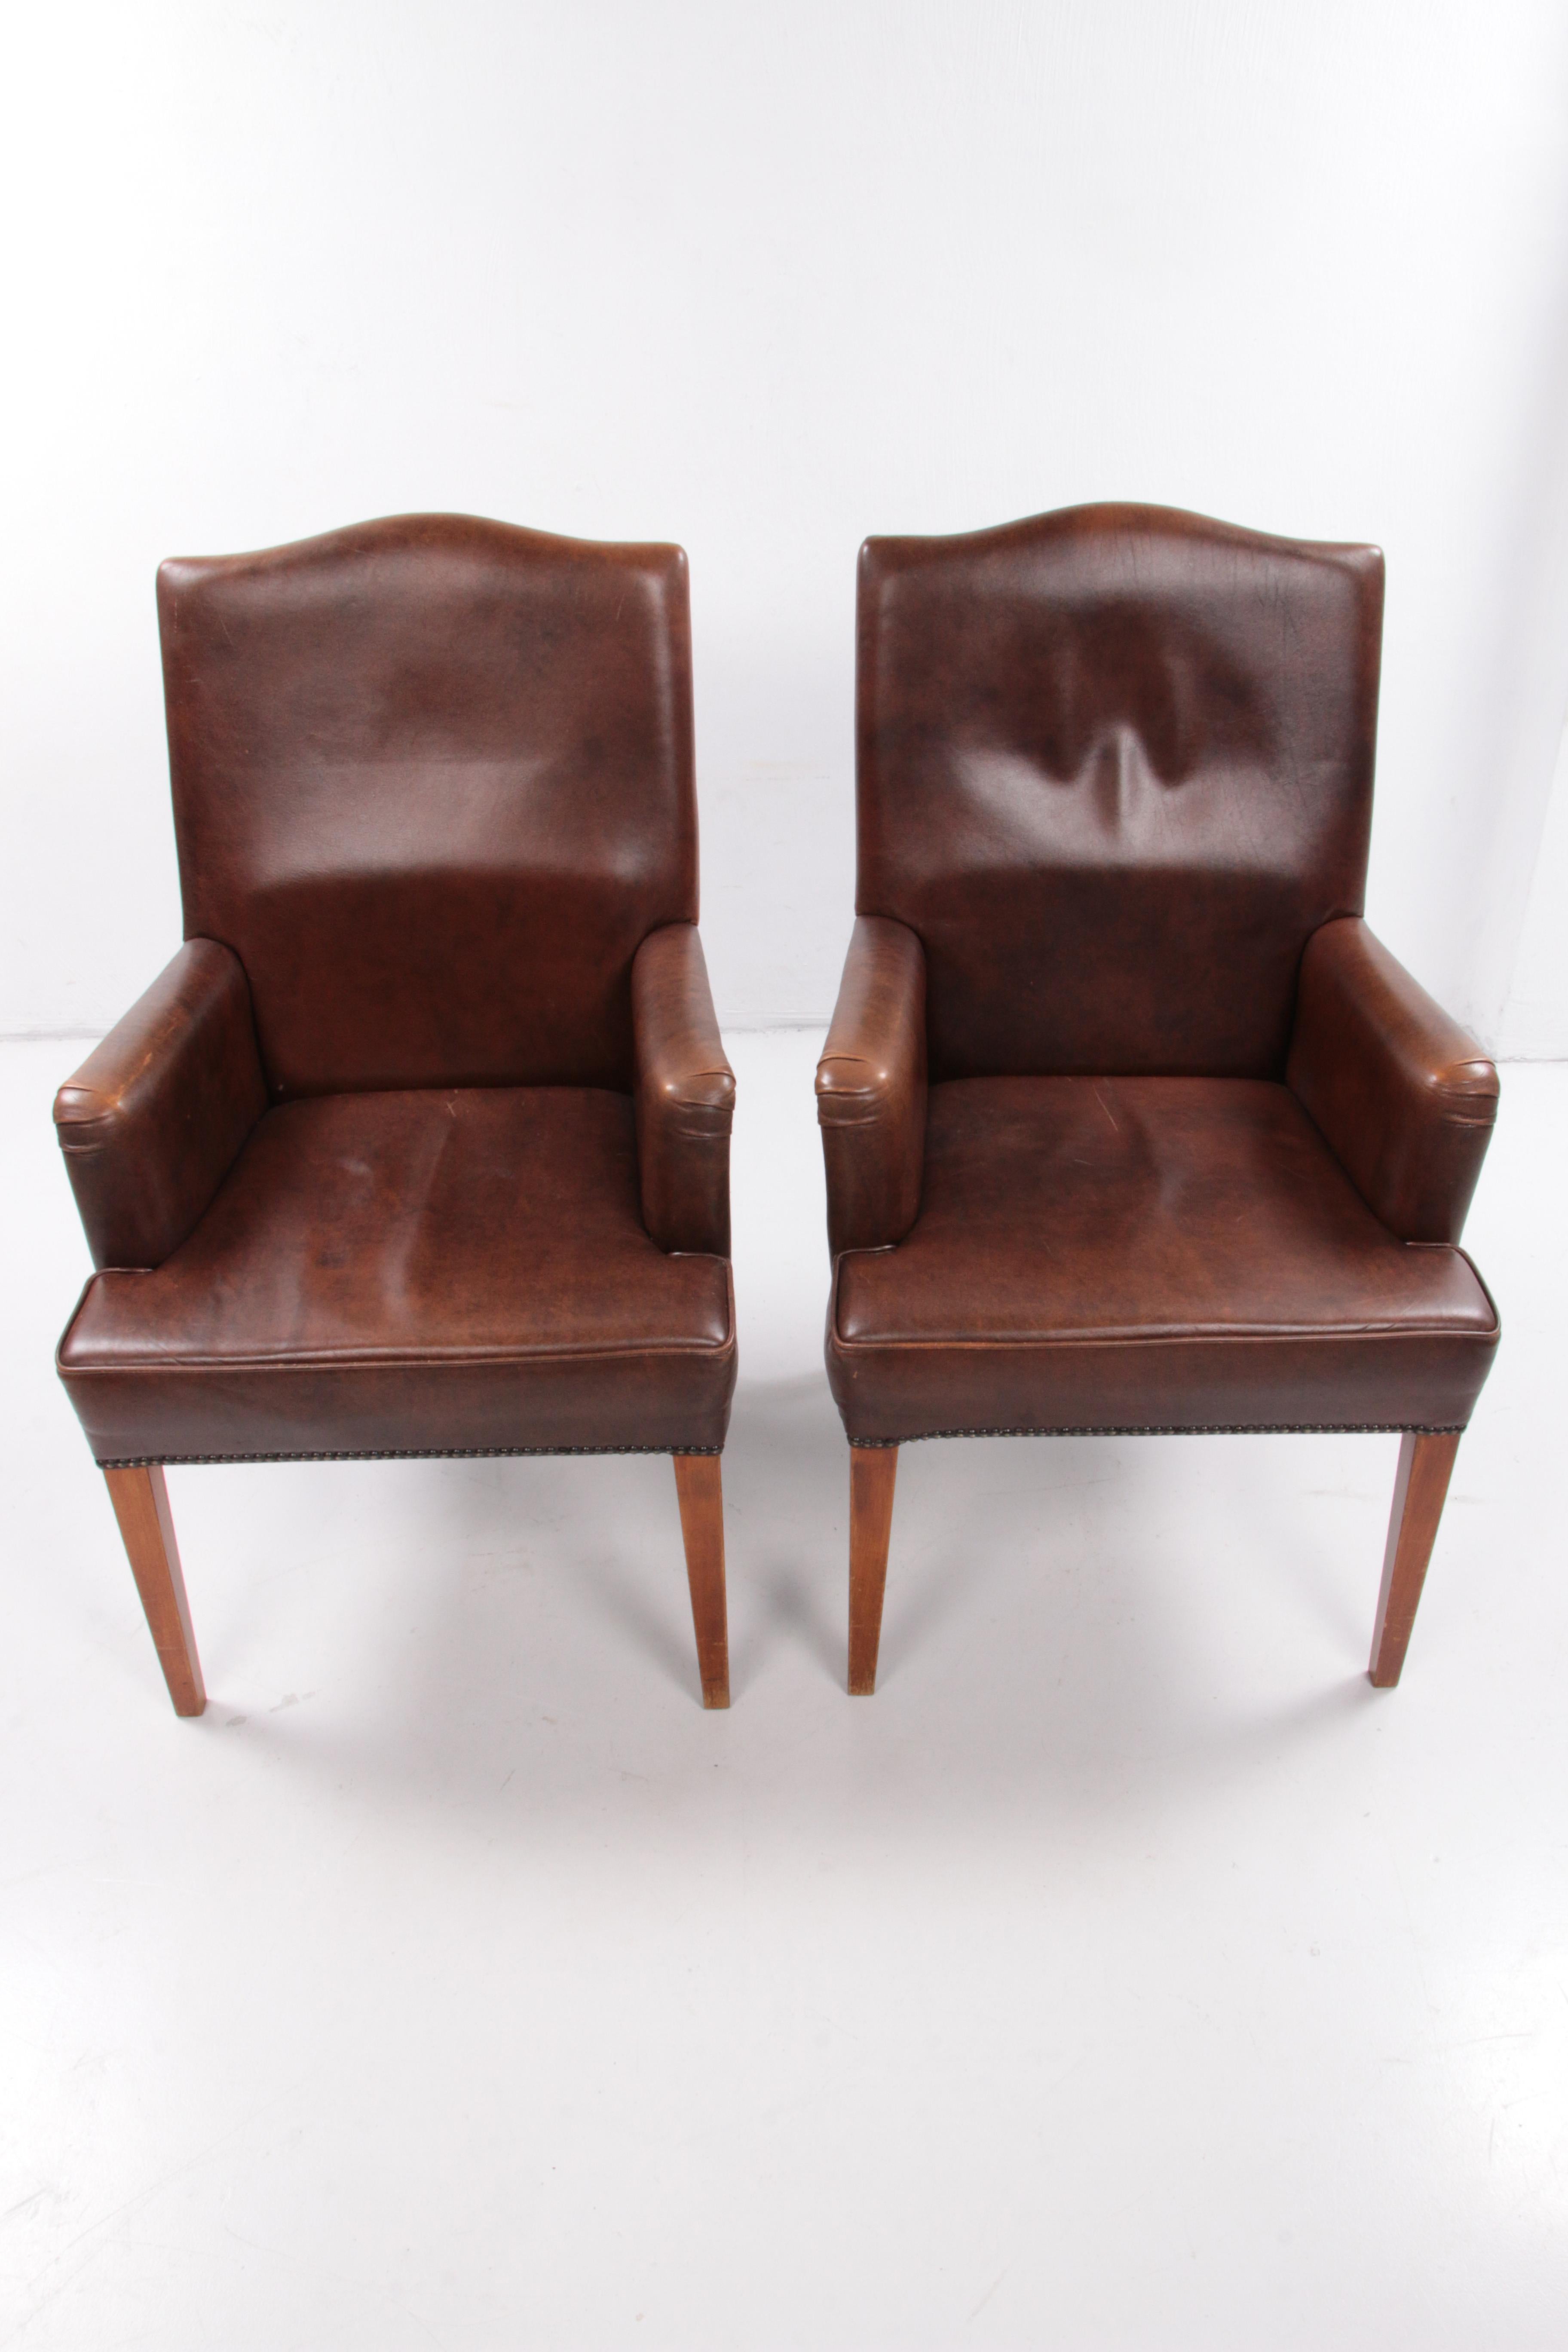 Leather Set of 2 dining room chairs in sheep leather, 1970 Netherlands. For Sale